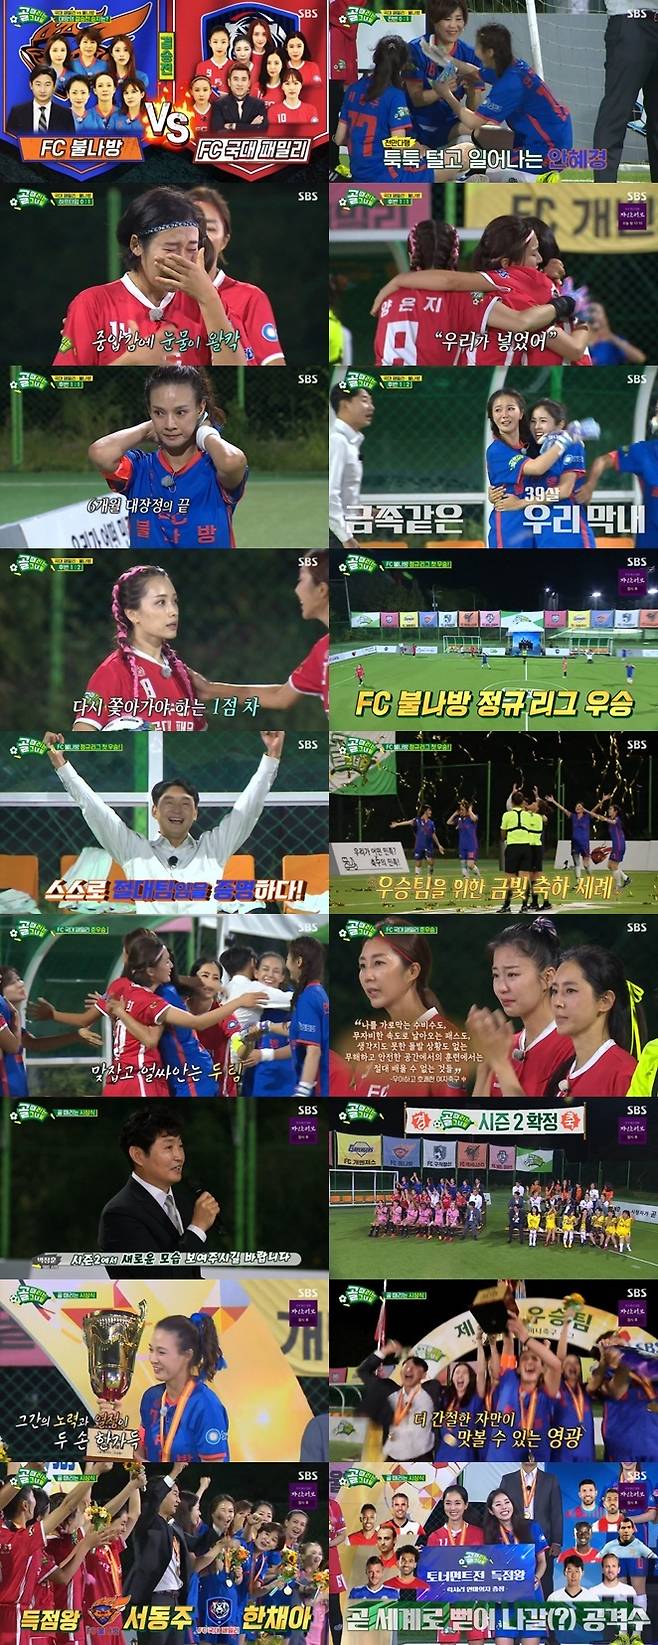 Seoul=) = Kick a goal FC Bull moths have been crowned regular UEFA Champions League championsOn the SBS entertainment program Kick a goal (hereinafter referred to as Golden Girl), FC Bull moth (director Lee Chun-soo/Park Sun-young Shin Hyo-beom, Johana Song Eun-young, Ahn Hye-Kyung Seo Dong-joo) and FC National University Family (director Kim Byung-ji/Han Chae-ah Shim Ha The final final result of the semi-euyun Yang Eun Ji Nam Hyun-hee Park Seung-hee) was revealed.With the opening goal of Seo Dong-joo, the moths were one point ahead, and goalkeeper Ahn Hye-Kyung, who was preventing the onslaught of the national family, was injured.Ahn Hye-Kyung, who bumped into Han Chae-ah, put in the missing lens and relieved everyone with a waking up again.The forward pressure of the fire moths caused the national family to fail to connect with the attack, and the pass was blocked. Eventually, the first half ended at 1:0.The national family has shrunk, and Shim Ha-eun tears in a sense of pressure.However, when the second half began, the National Family regained its vitality and began to push the moth.With the menacing goals ensuing, the famous Seohyun beat Shin Hyo-beom to quickly knock on the ball, and the inundated Han Chae-ah scored a miracle equalizer by connecting the ball from Ahn Hye-Kyung.After allowing the equalizer, the embarrassed moth and the national family who broke down tears in the equalizer all caught up and Kyonggi resumed.Ace Park Sun-young was dedicated to defense in the attack of the National Family, and the National Family continued to create chances.Lee Chun-soo asked for the operation time, and Lee Chun-soo cheered on the tired moth, saying, Since you have played soccer for eight months, you are a soccer player, now a mental fight, a desperate team wins.With the Kyonggi resumed and the battle continued, the moths quickly attempted to attack through the guarded national family and created a threatening scene.Seo Dong-joo then scored a multi-goal with a surprise goal.The National Family did not give up, but goalkeeper Yang Eun Ji joined the attack, but the fire moth kept the goal to the end and Kyonggi ended.The first champion, Bull Moth, succeeded in winning two consecutive victories and became the first regular UEFA Champions League champion.The two teams were impressed by the way they were touching each other after Kyonggi ended.SBS President Park Jung-hoon, who participated in the awards ceremony, declared, I hope you will show me a new look in Season 2.The bronze medal, the World Clath, the silver medal, the national family, and the gold medal were called the fire moth. The fire moth won the championship trophy and the gold medal and won 10 million won.The top scorer was Seo Dong-joo of the moth and Han Chae-ah of the National Family.Then, the all-star game to be held together by the members of the Golden Girl Choi Jung-ye was anticipated.On the other hand, SBS Kick a goal is a program that is made by the sincere soccer players and the Korean Legend Taegeuk warriors.